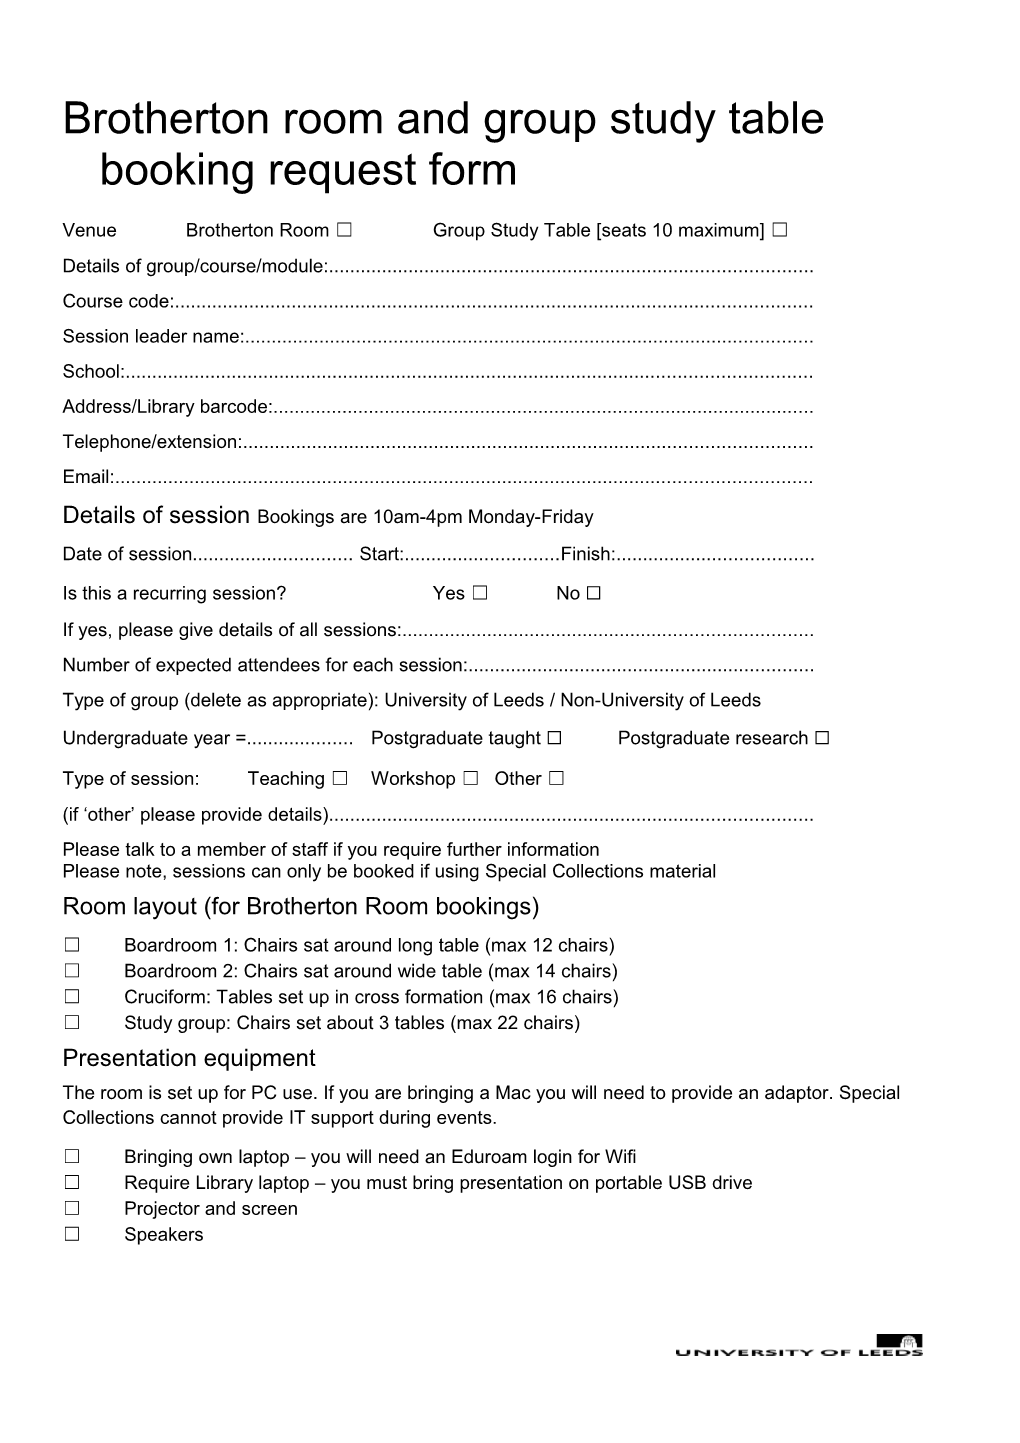 Brotherton Room and Group Study Table Booking Request Form